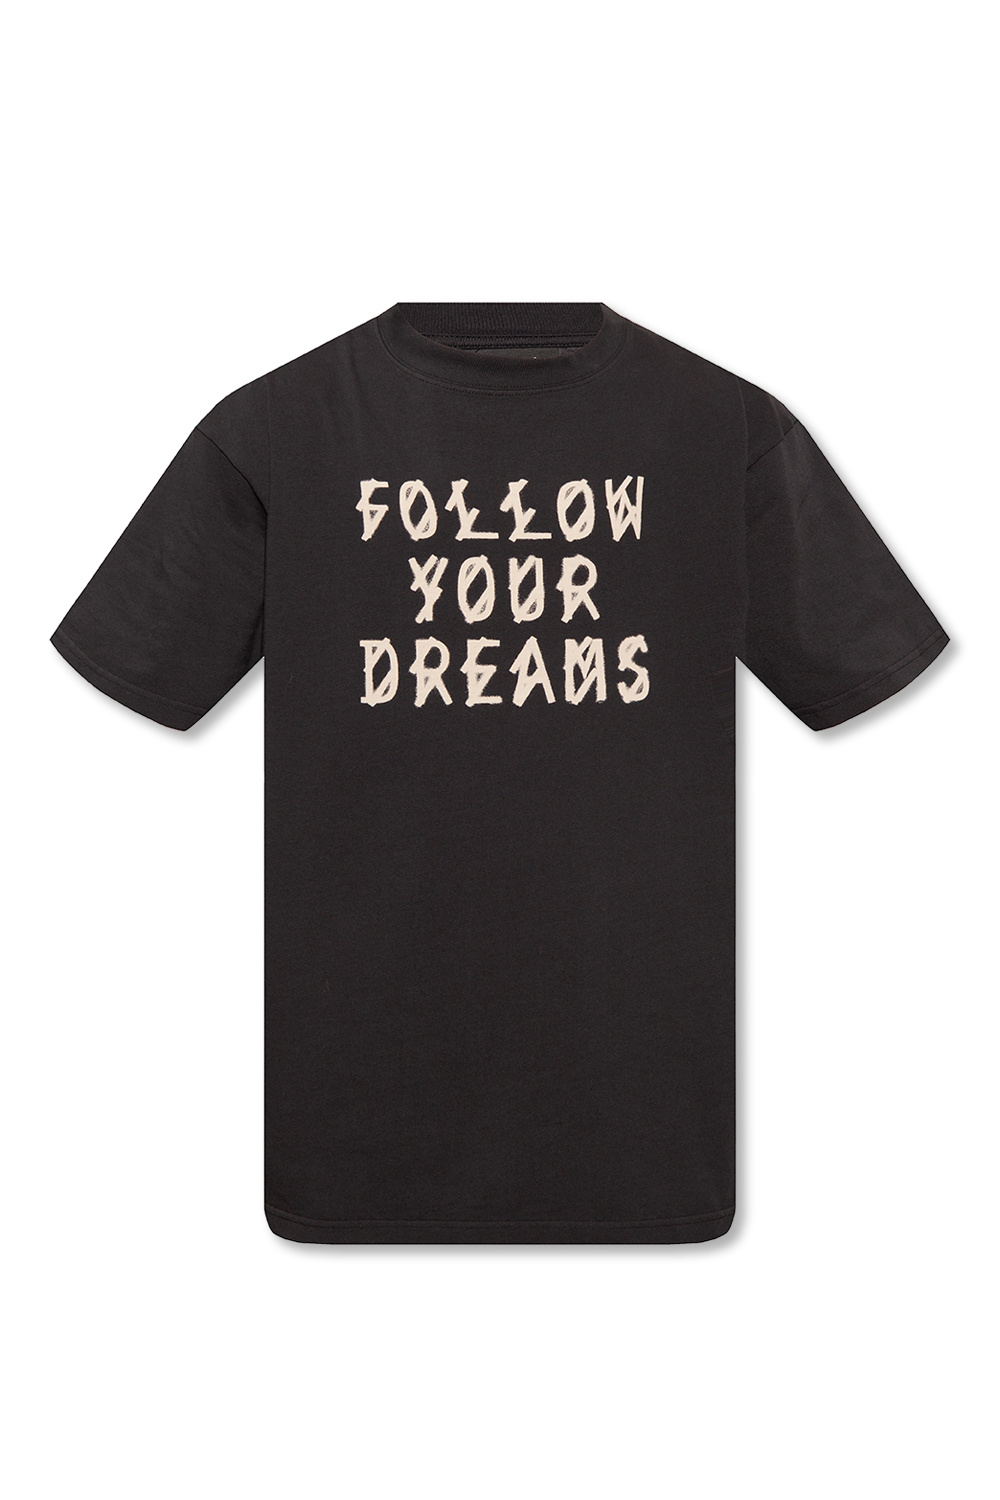 44 LABEL GROUP FOLLOW YOUR DREAMS Tシャツトップス